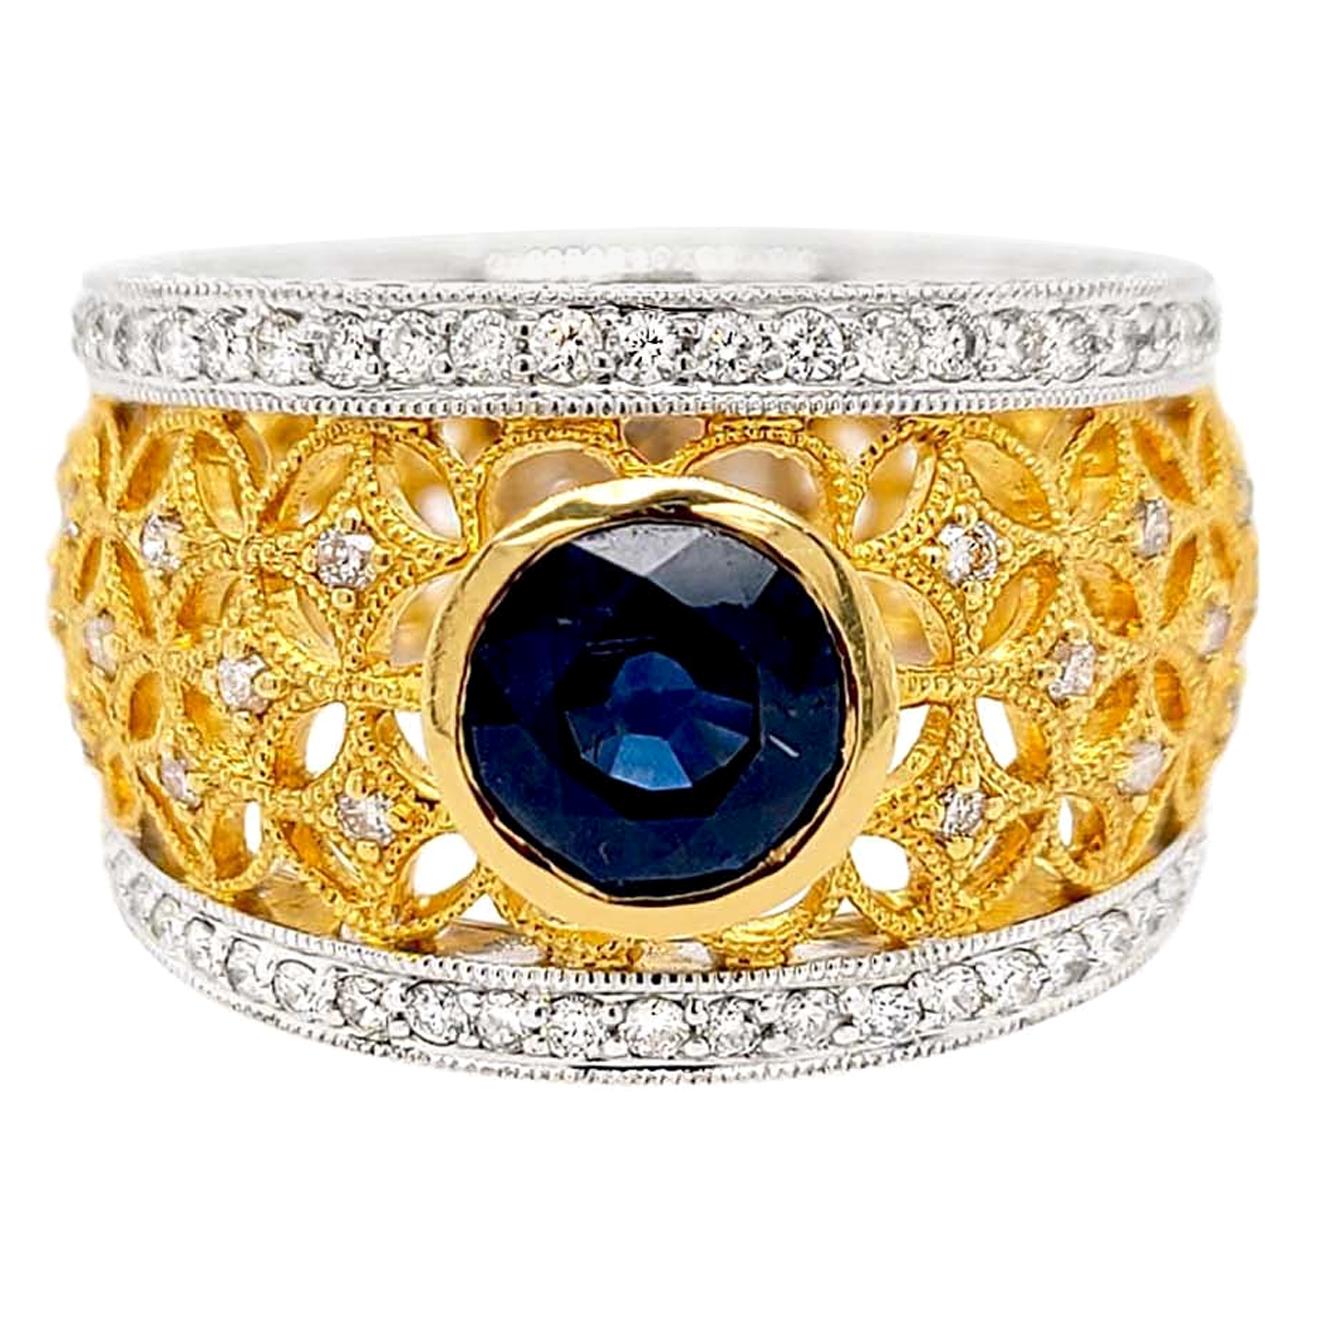 Two-Tone 18 Karat Gold Italian Diamond Ring with Blue Sapphire Center Stone For Sale